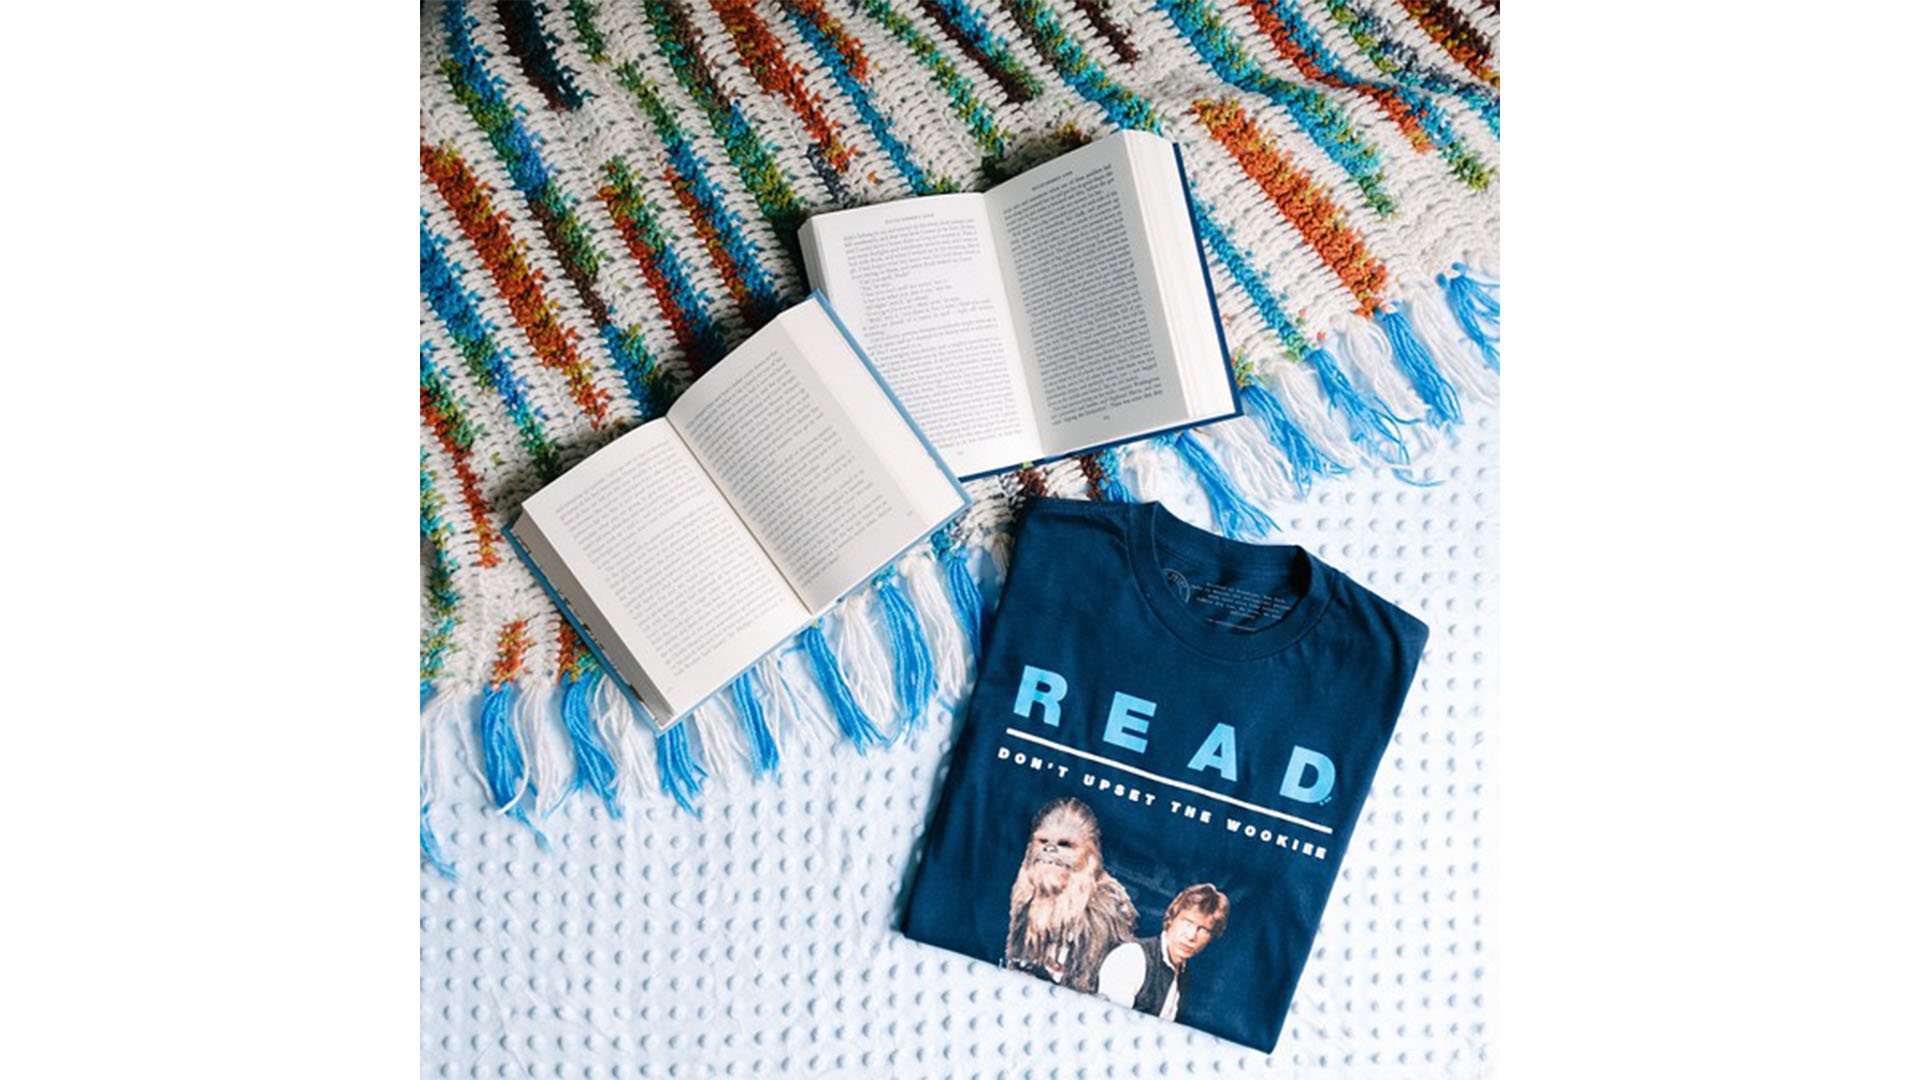 Two open books next to a folded navy blue t-shirt that says 